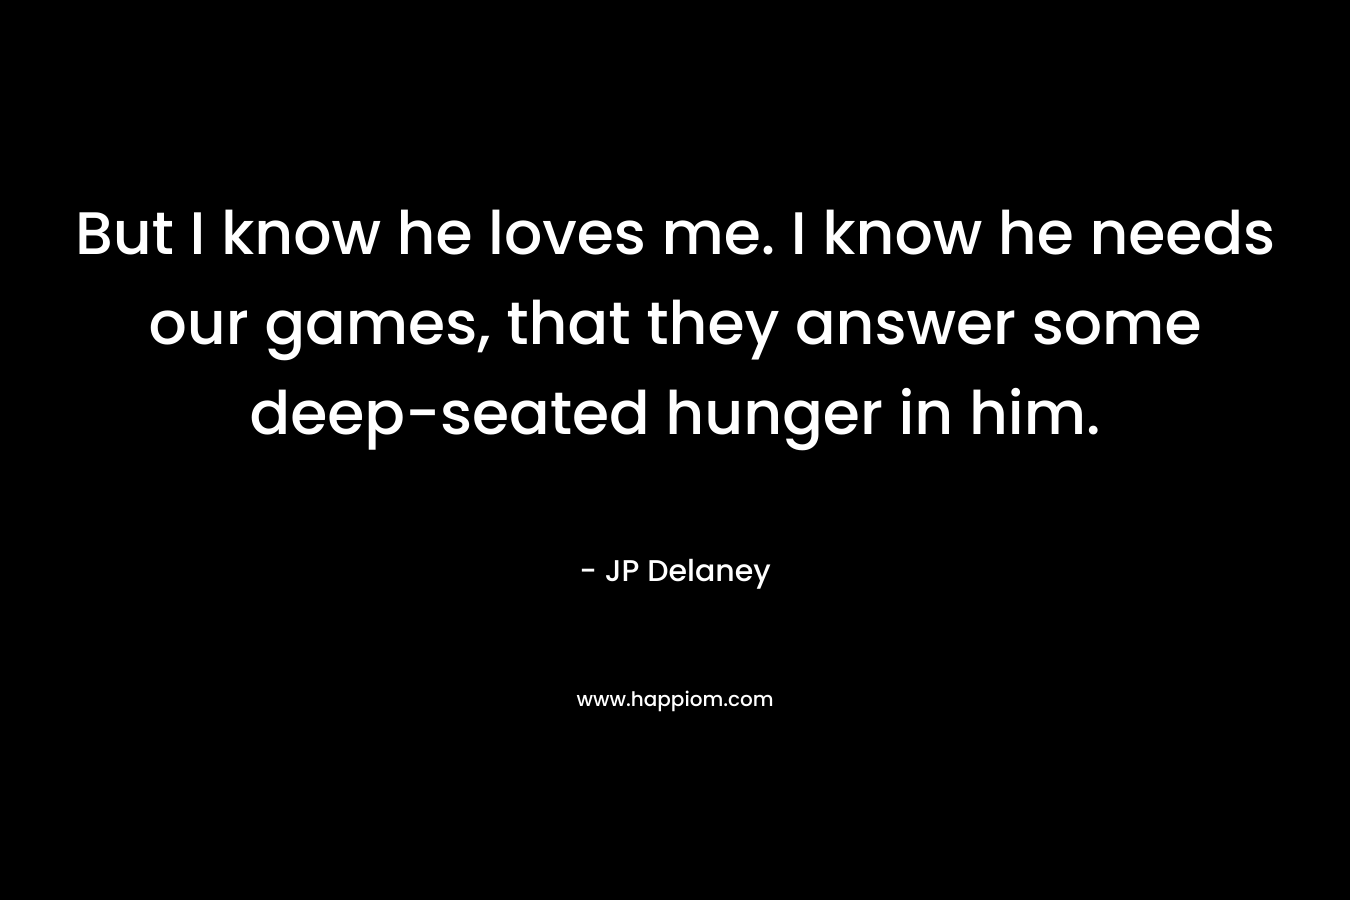 But I know he loves me. I know he needs our games, that they answer some deep-seated hunger in him. – JP Delaney